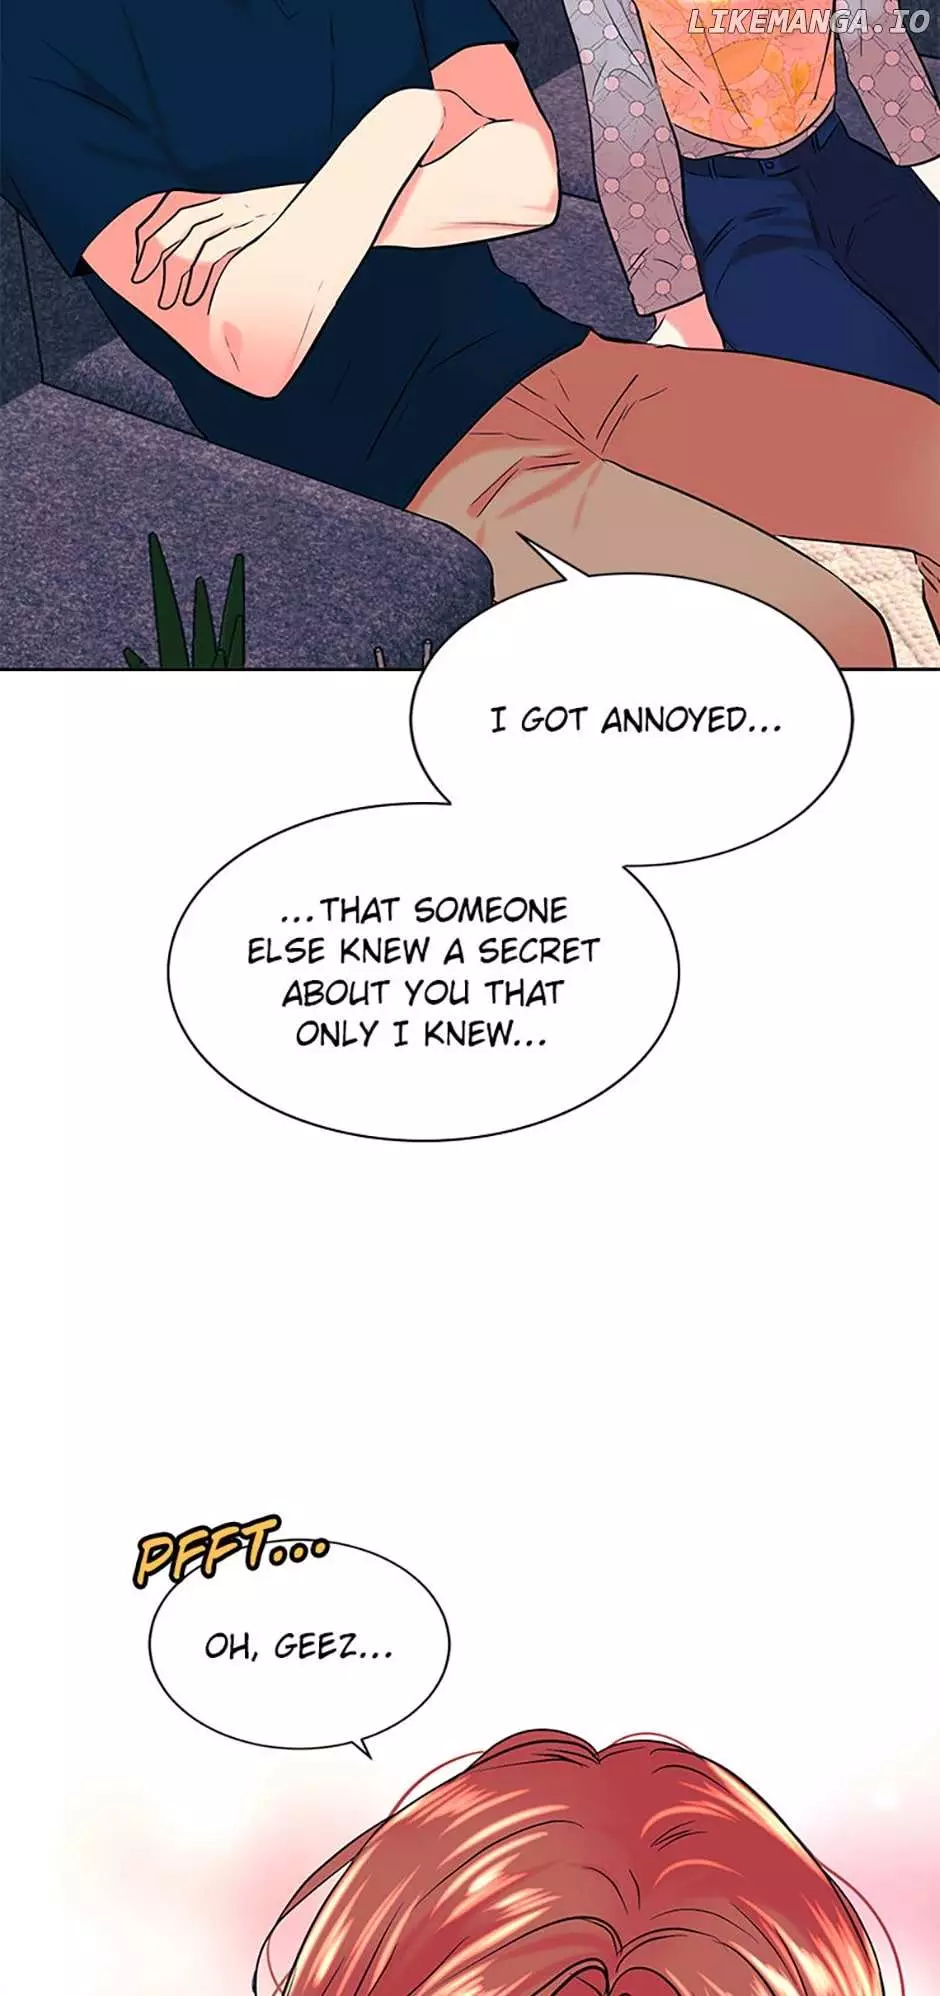 Melt Me In Your Voice - 59 page 11-9e065126